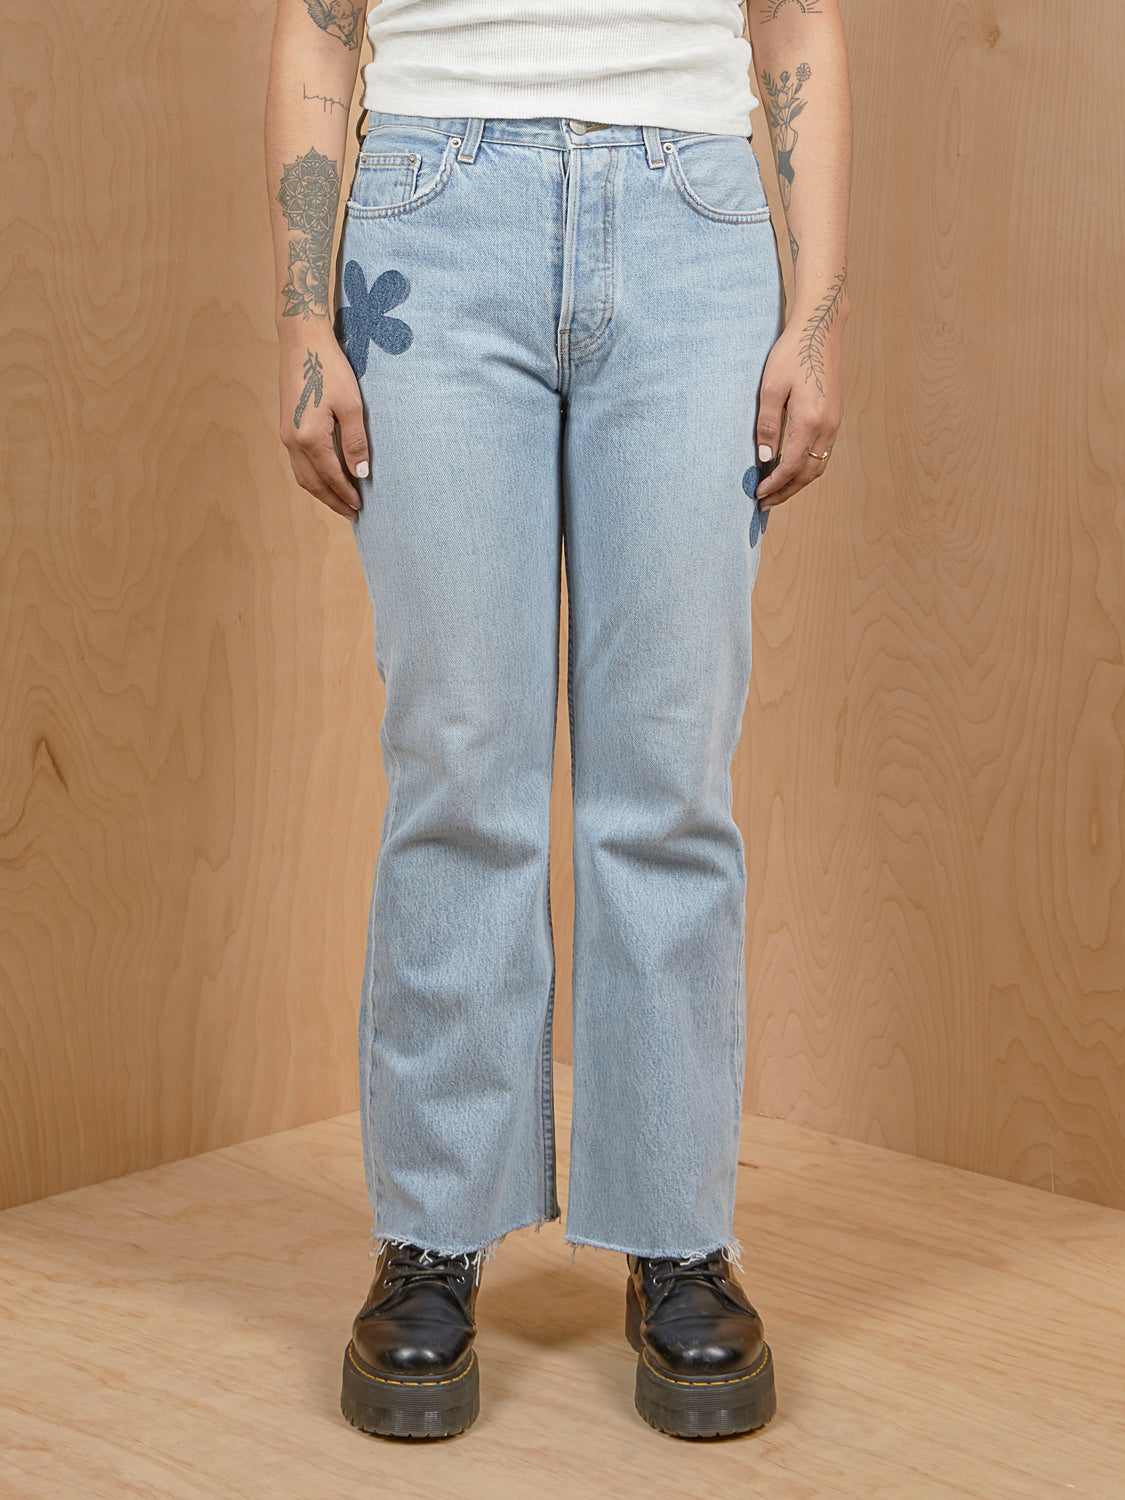 Reformation Light Washed Jeans with Flower Patches